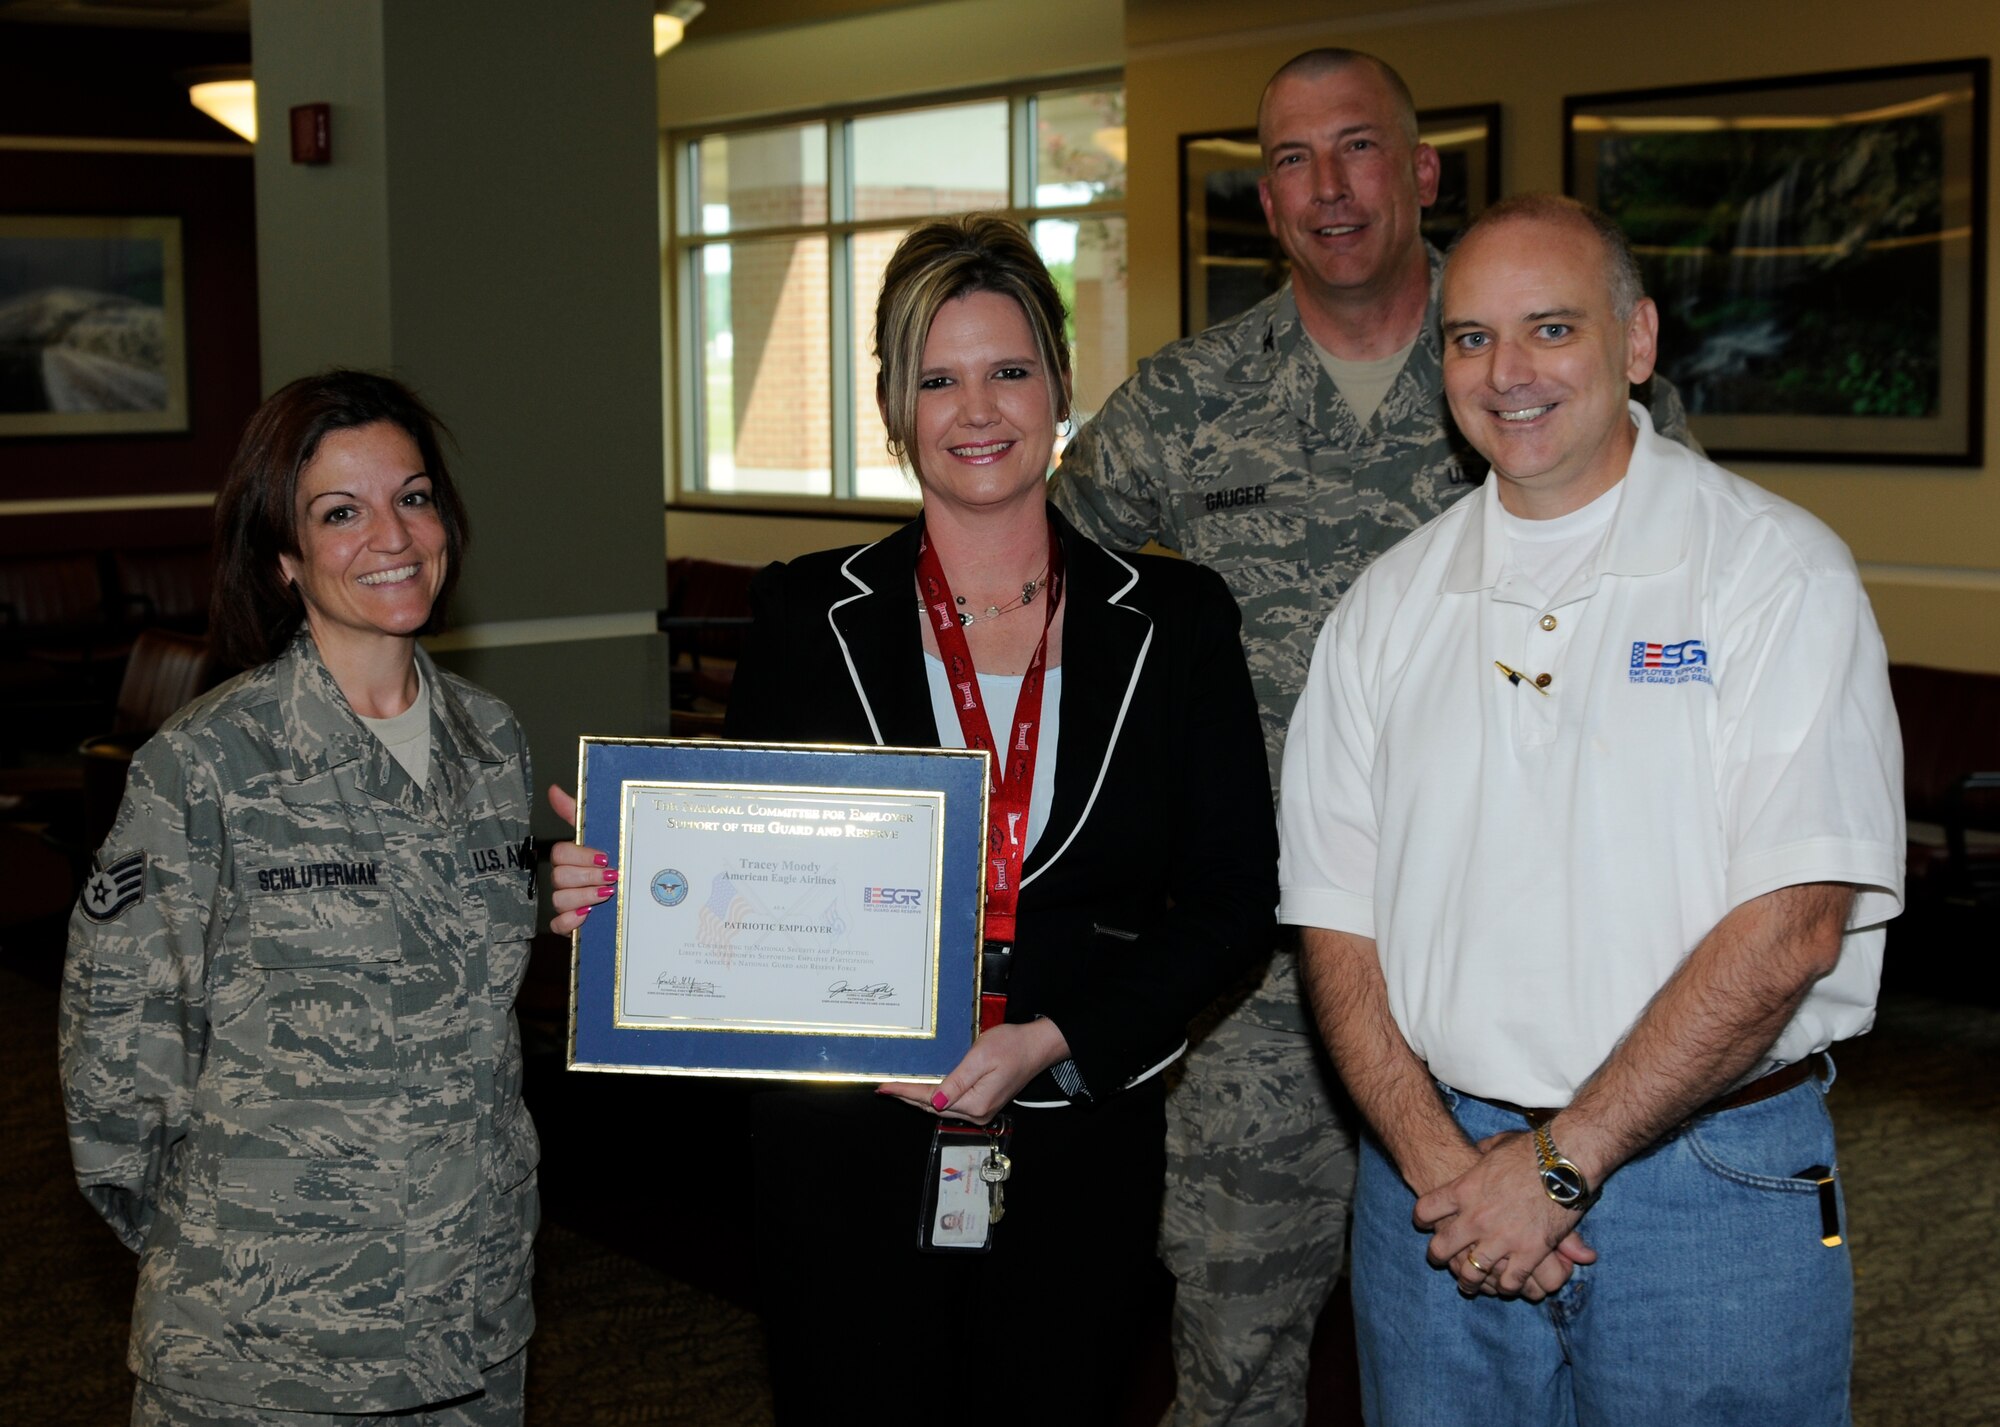 From left: Staff Sgt. Shilo Schluterman, a member of the 188th Aircraft Maintenance Squadron and American Eagle Airlines employee; Tracey Moody with American Eagle Airlines; Col. Pete Gauger, 188th Fighter Wing vice commander; and Jon Woodham, employer relations specialist with the Arkansas Committee for Employer Support of the Guard and Reserve. Moody, Schluterman’s civilian supervisor, was presented a Patriot Award for being highly supportive of Schluterman’s career in the Arkansas Air National Guard’s 188th Fighter Wing. (National Guard photo by Senior Master Sgt. Dennis Brambl/188th Fighter Wing Public Affairs)